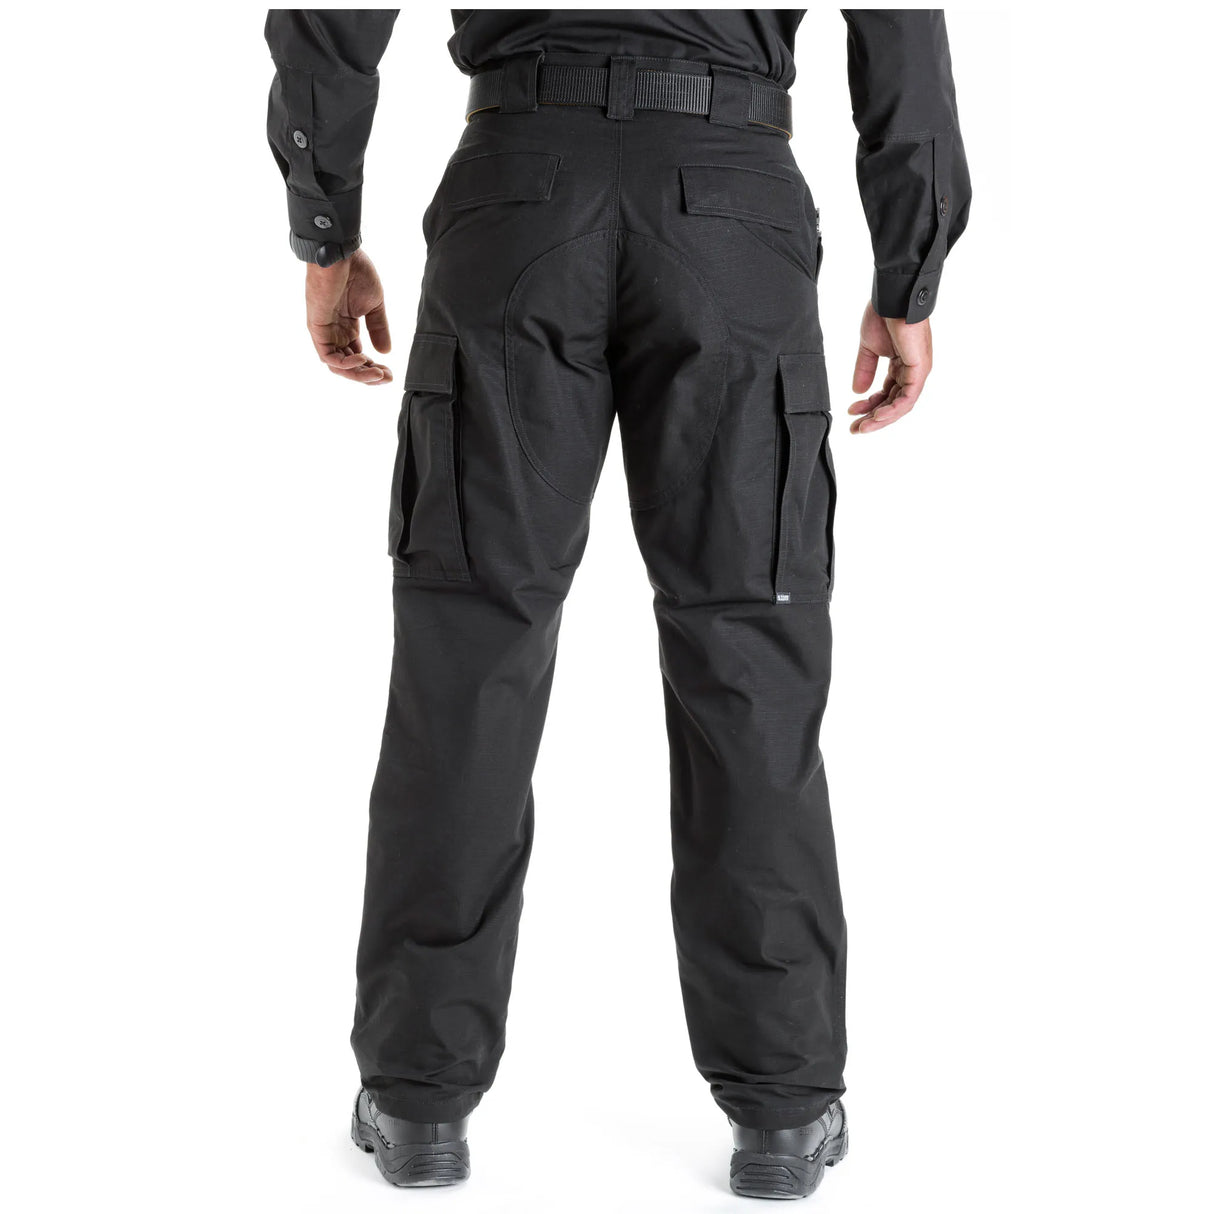 Teflon® Finish Tactical Pants: Resistant to stains and spills for added longevity.